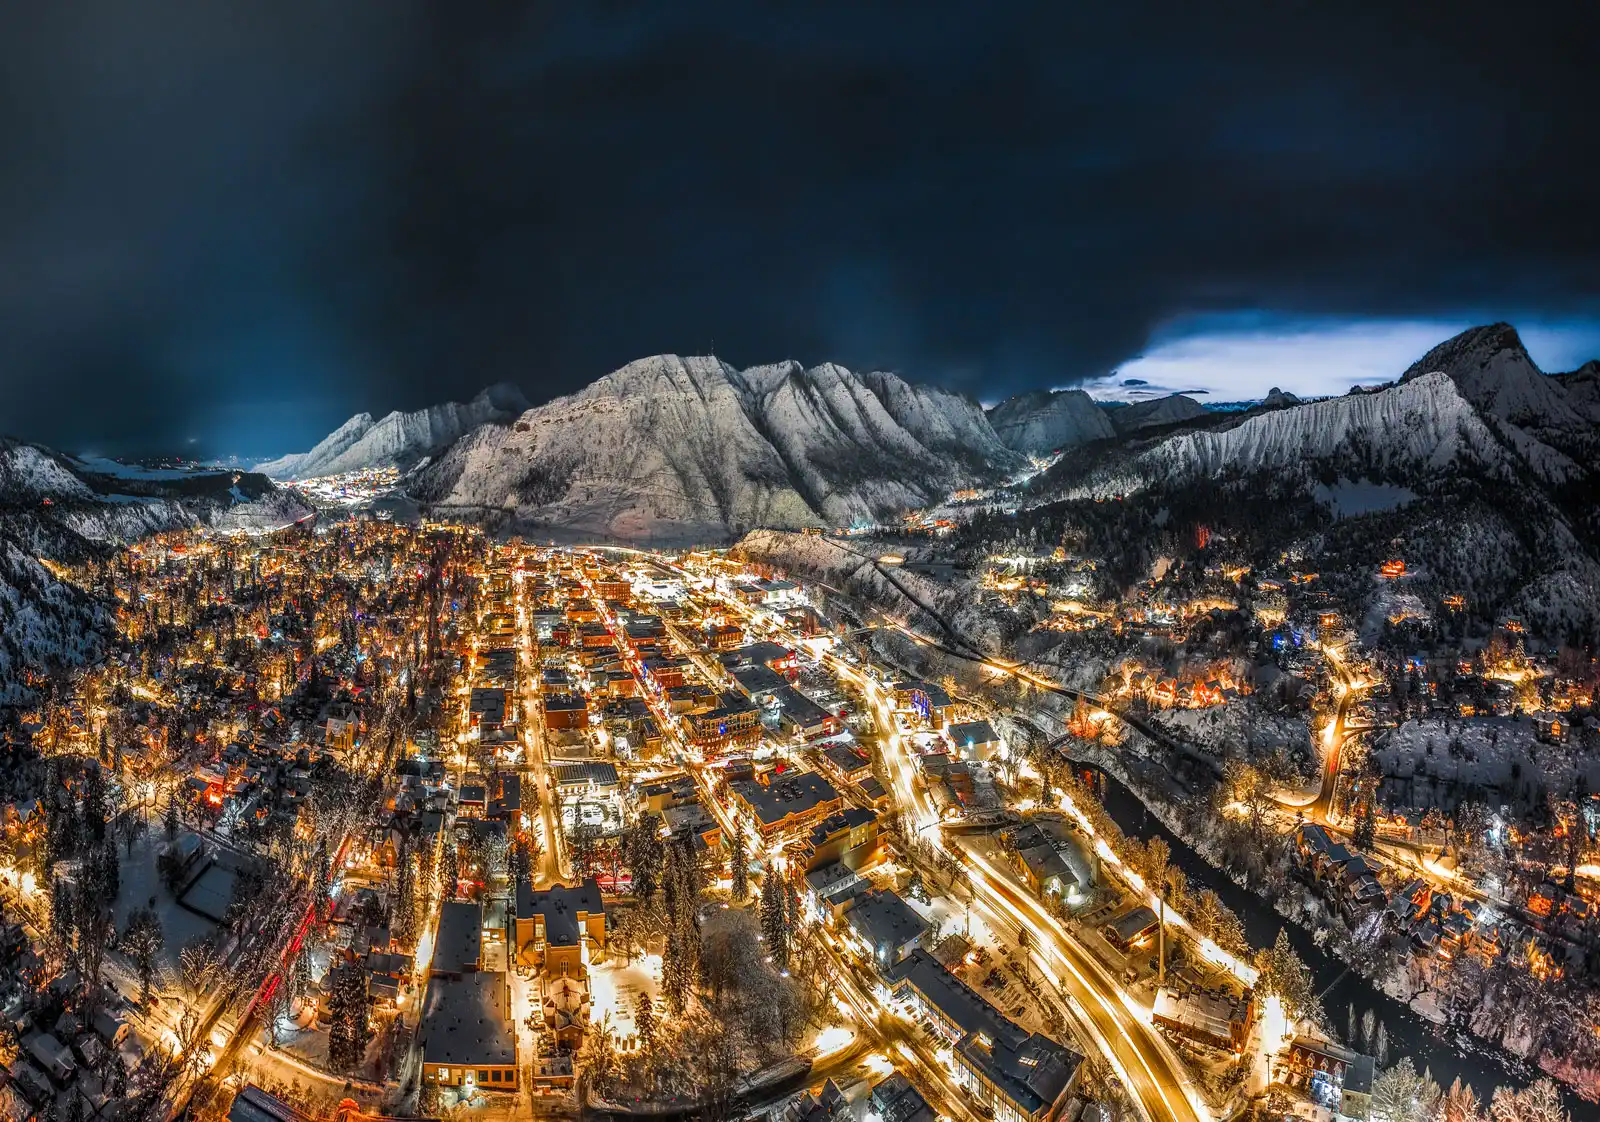 Aerial night view of Durango, Colorado, with illuminated streets and snow-covered San Juan Mountains under a stormy sky.